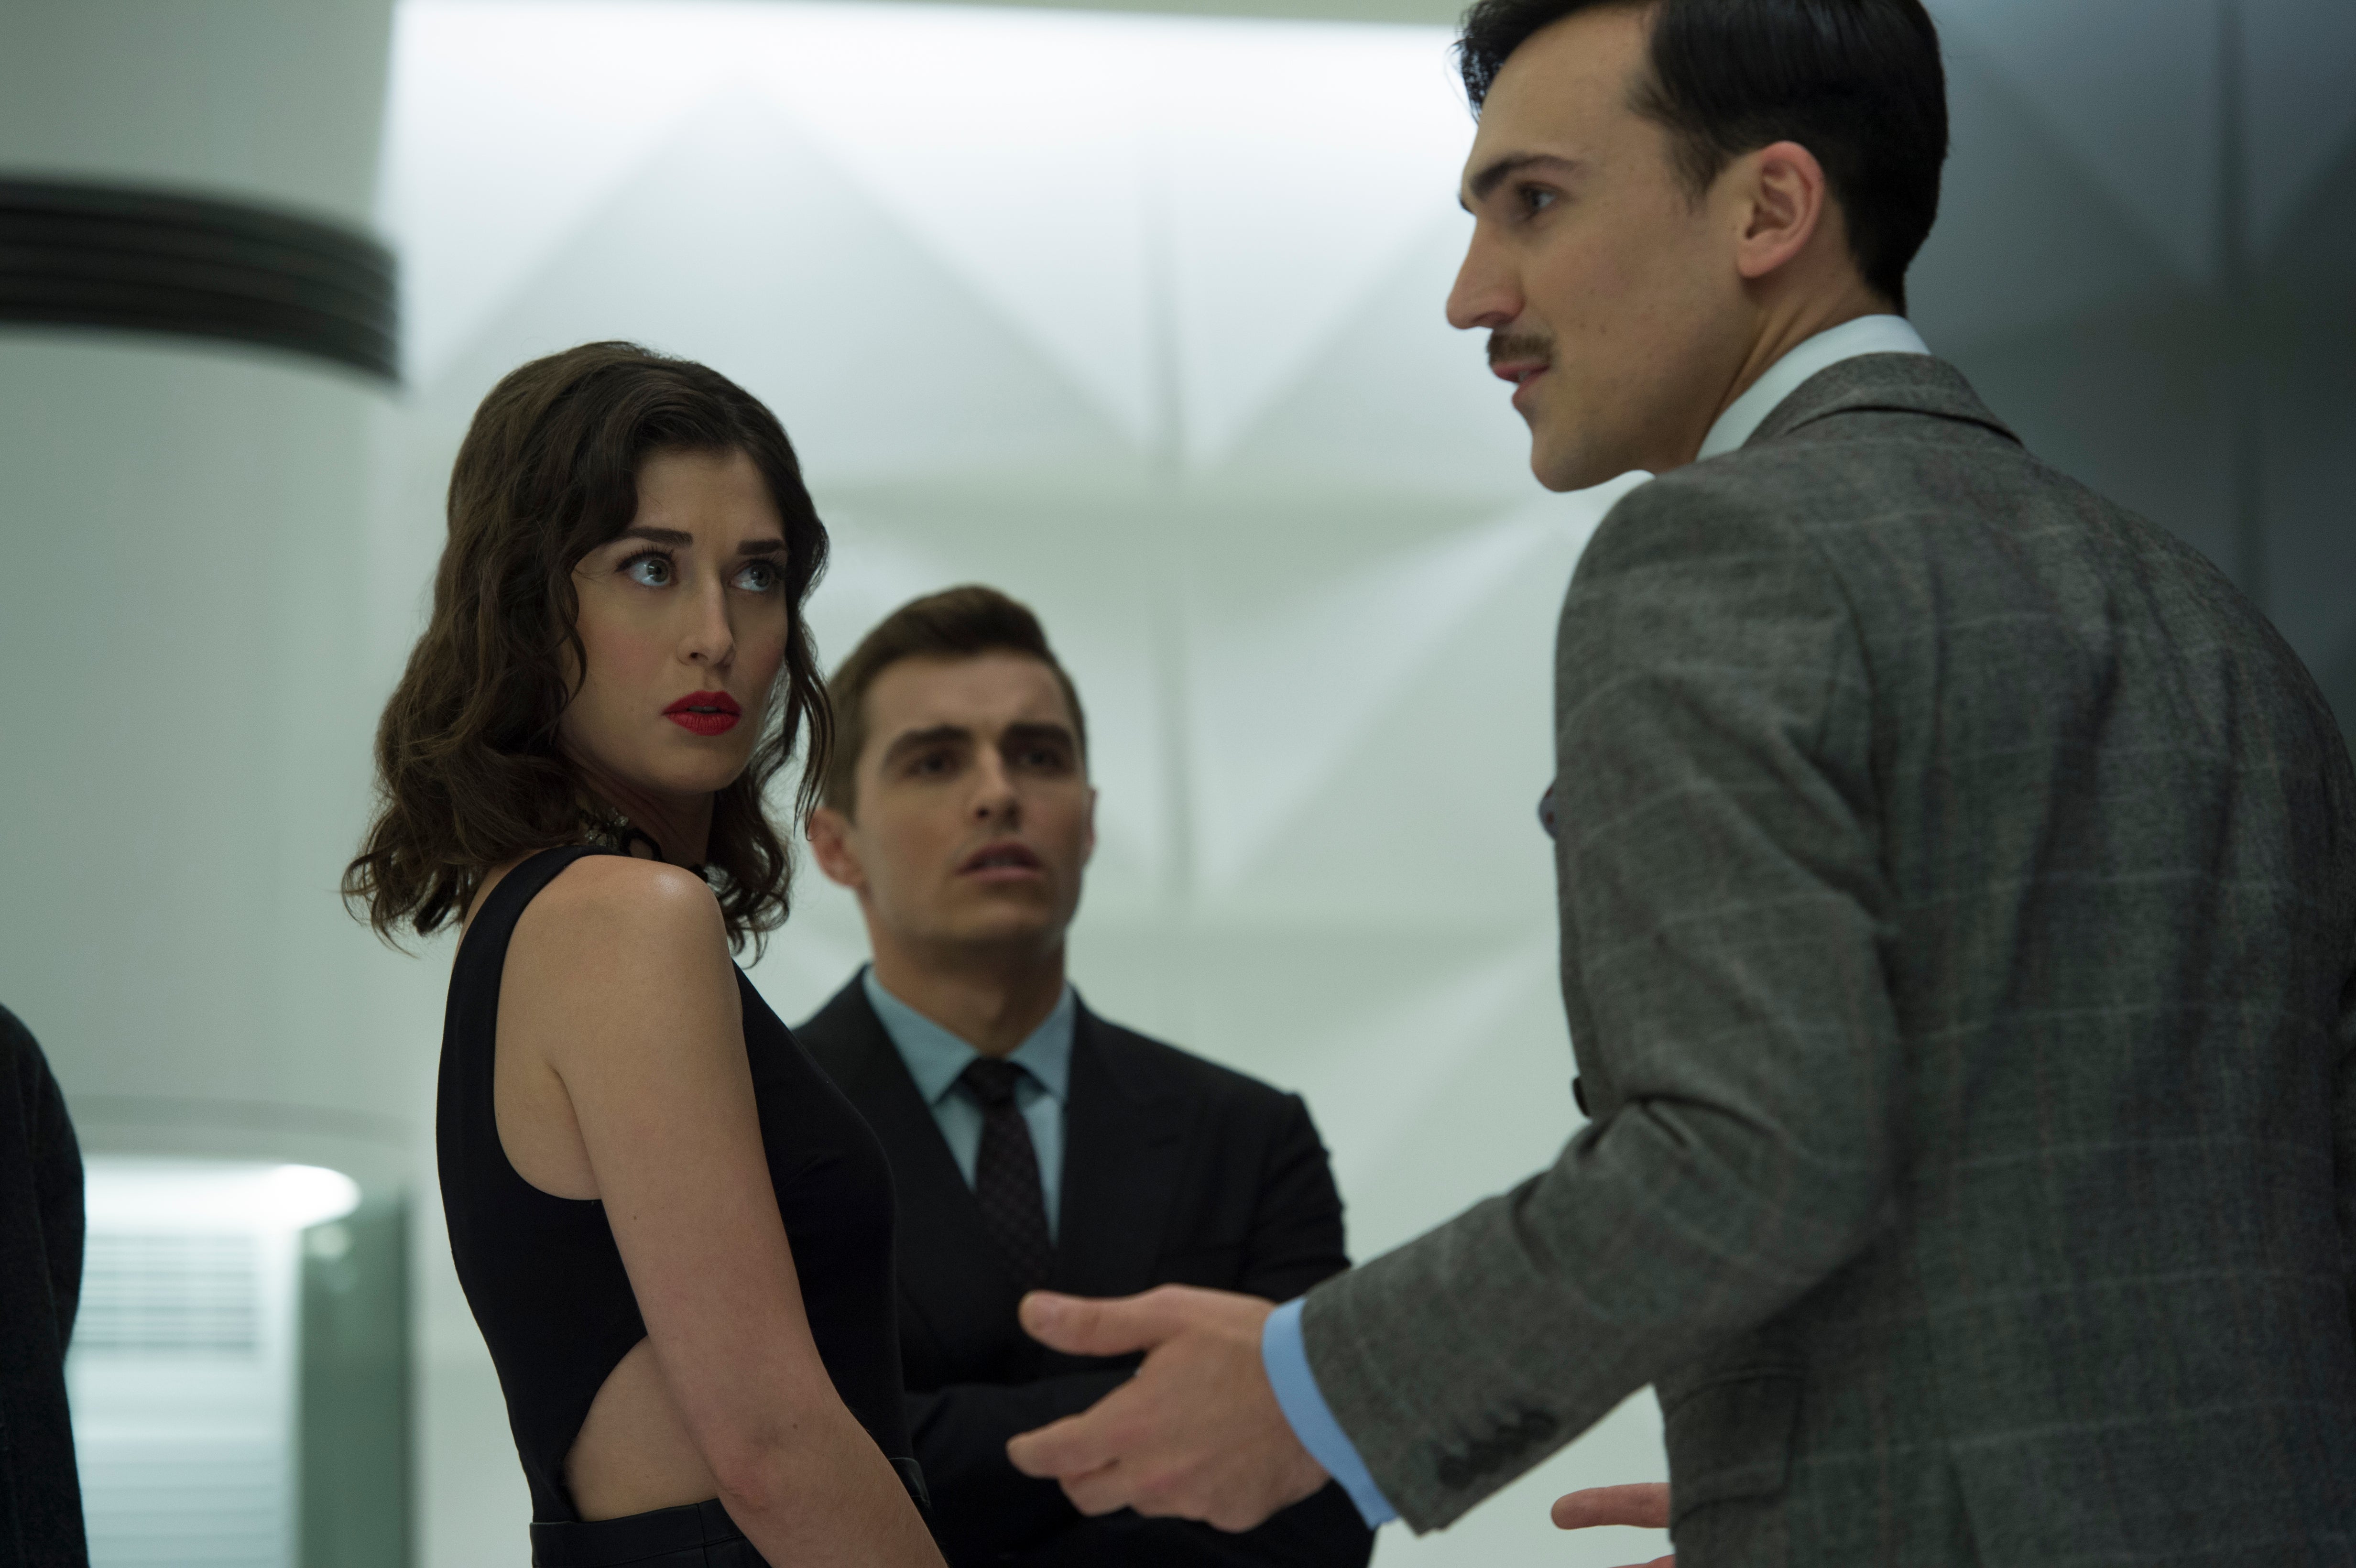 Lizzy Caplan took over from Isla Fisher in ‘Now You See Me 2’